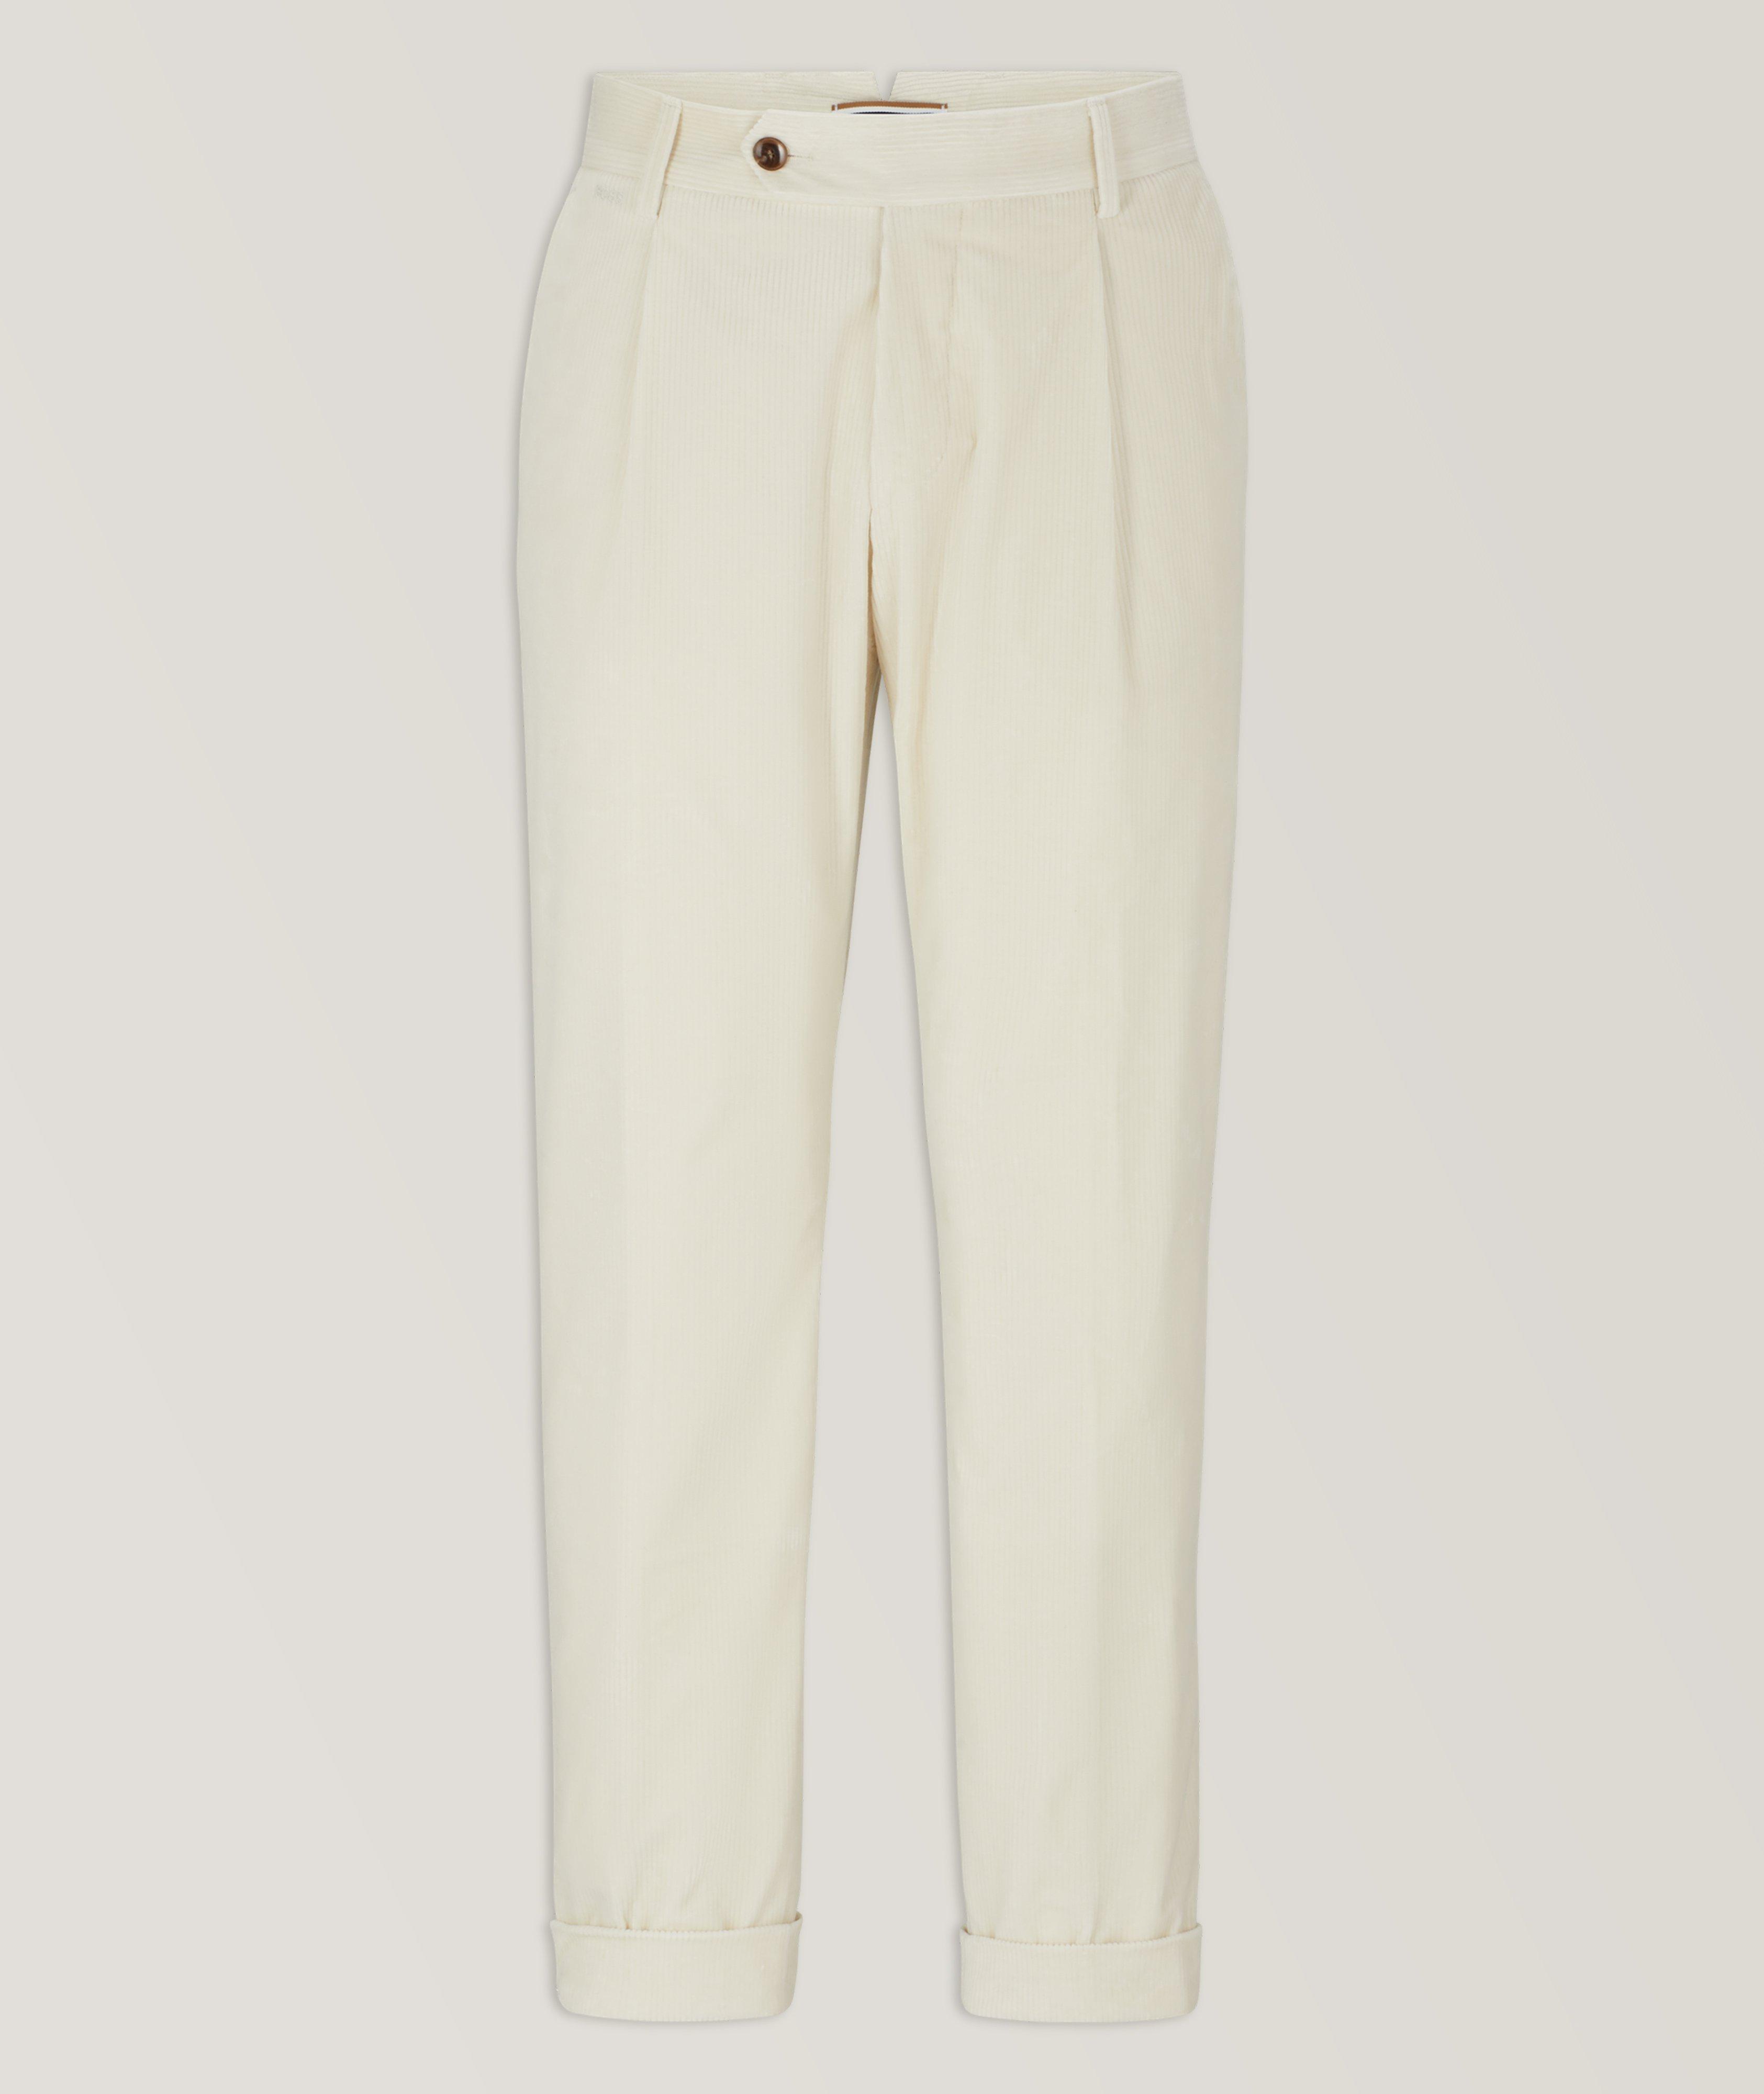 Pleated Stretch-Cotton Corduroy Trousers image 0